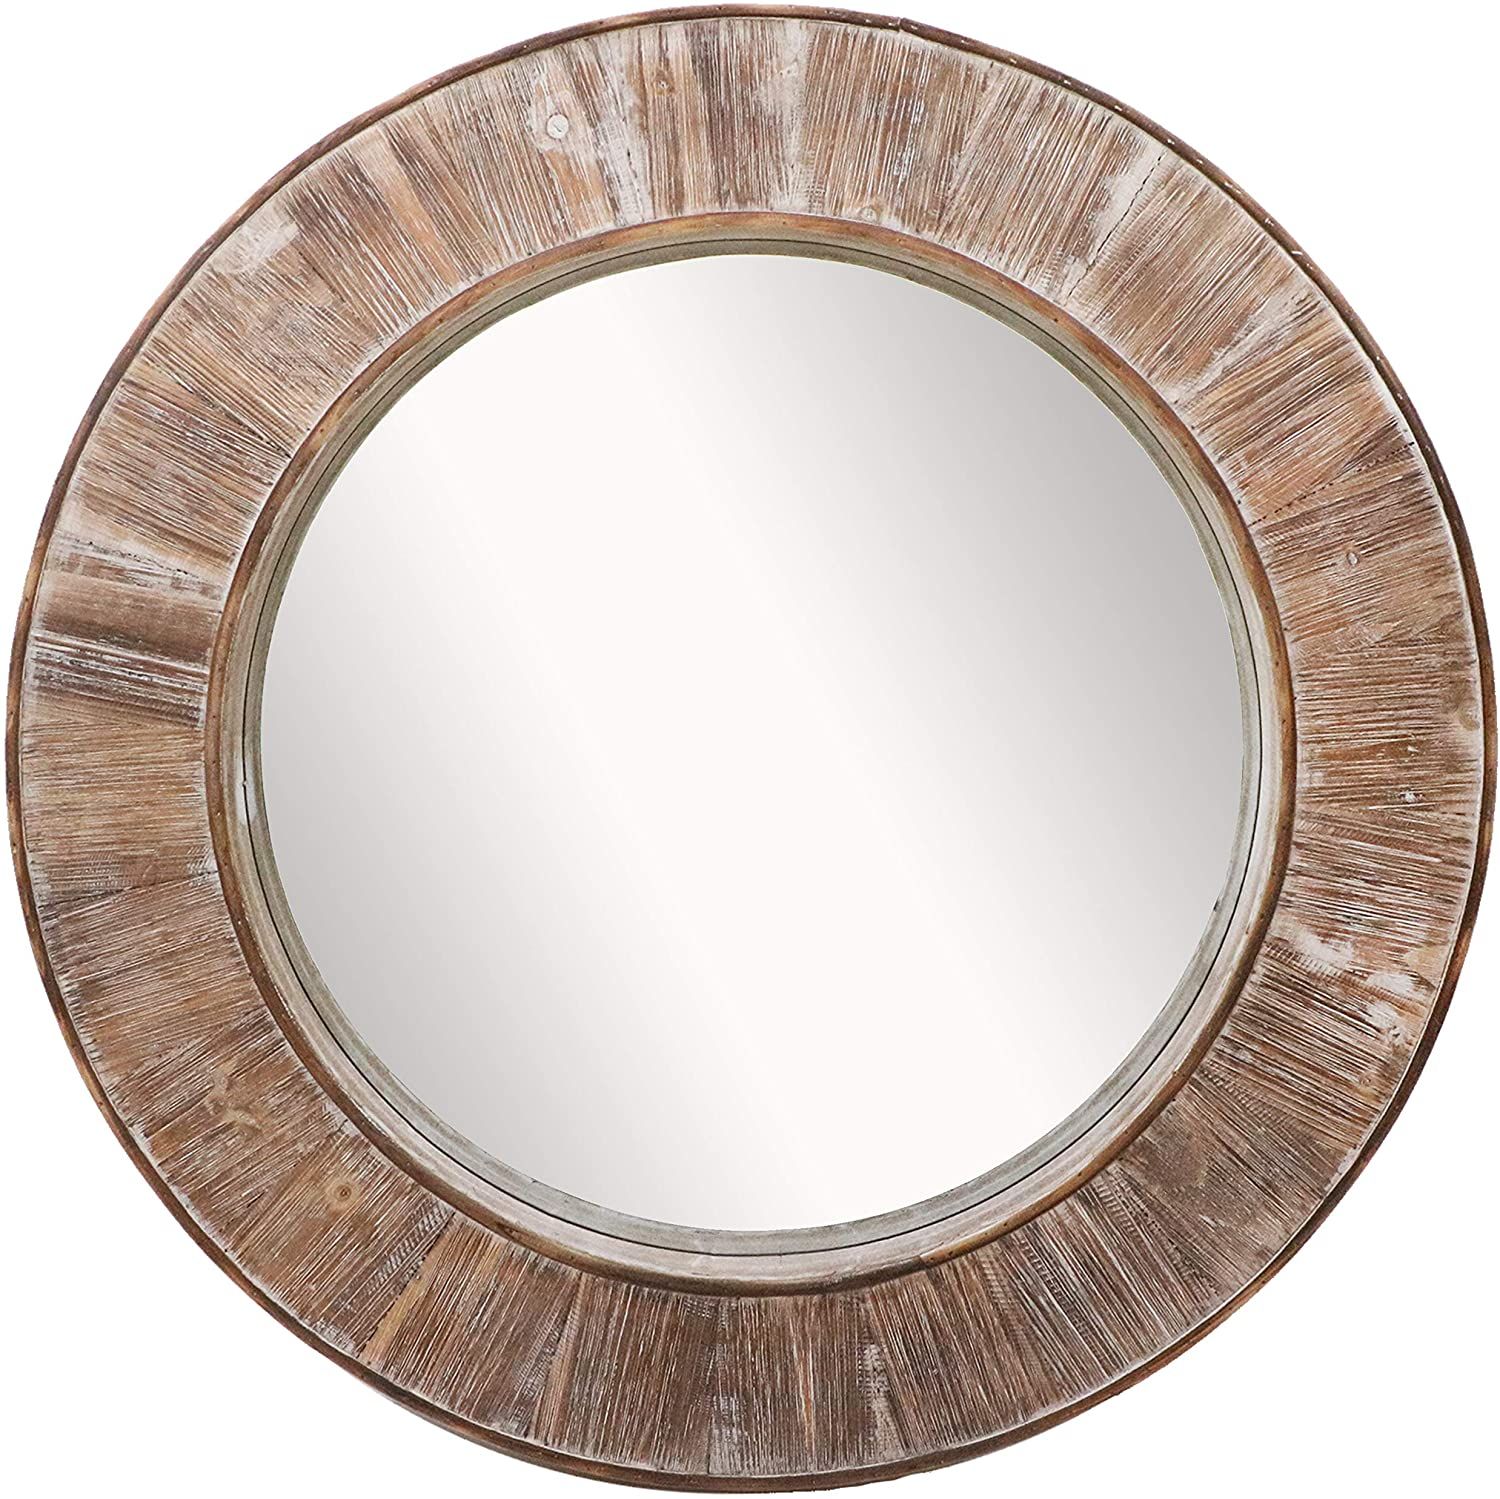 Barnyard Designs Round Decorative Wall Hanging Mirror Large Wooden In Organic Natural Wood Round Wall Mirrors (View 11 of 15)